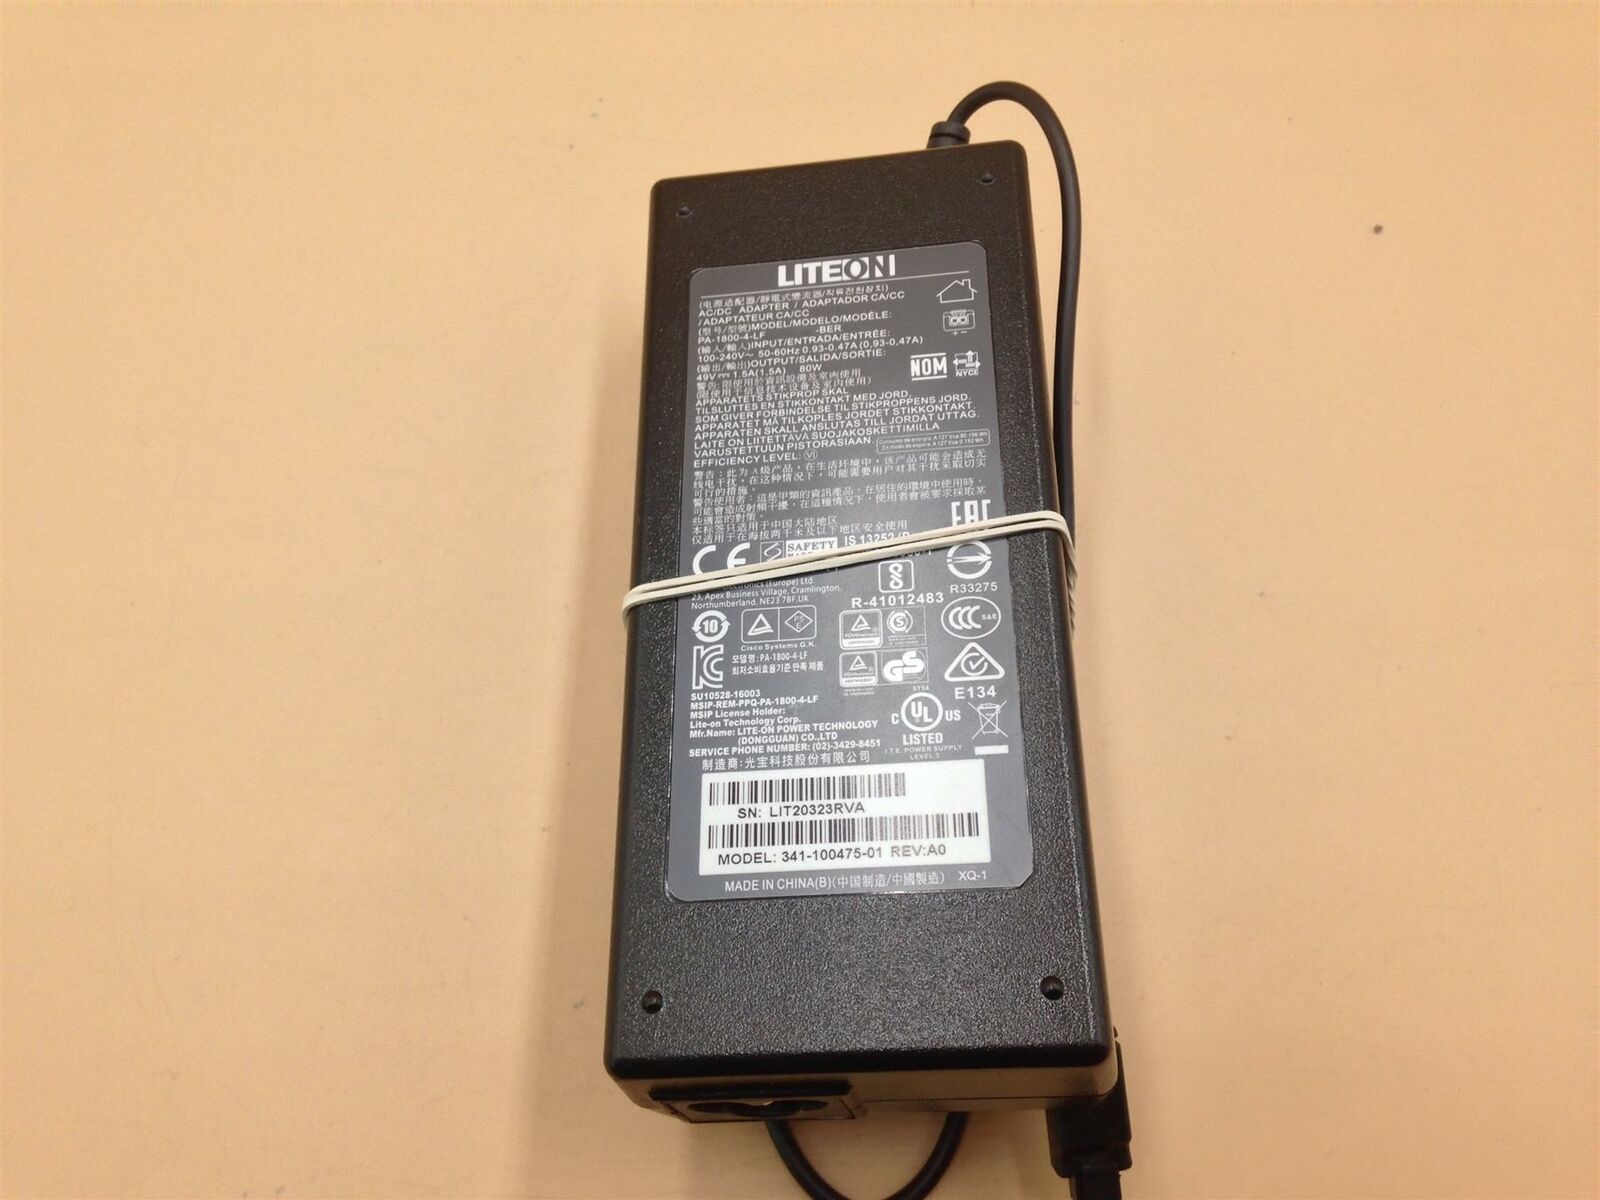 Liteon PA-1800-4-LF 341-100475-01 49V 1.5A 74W AC Adapter Power Charger, Brand: Liteon Compatible Brand: Universal T